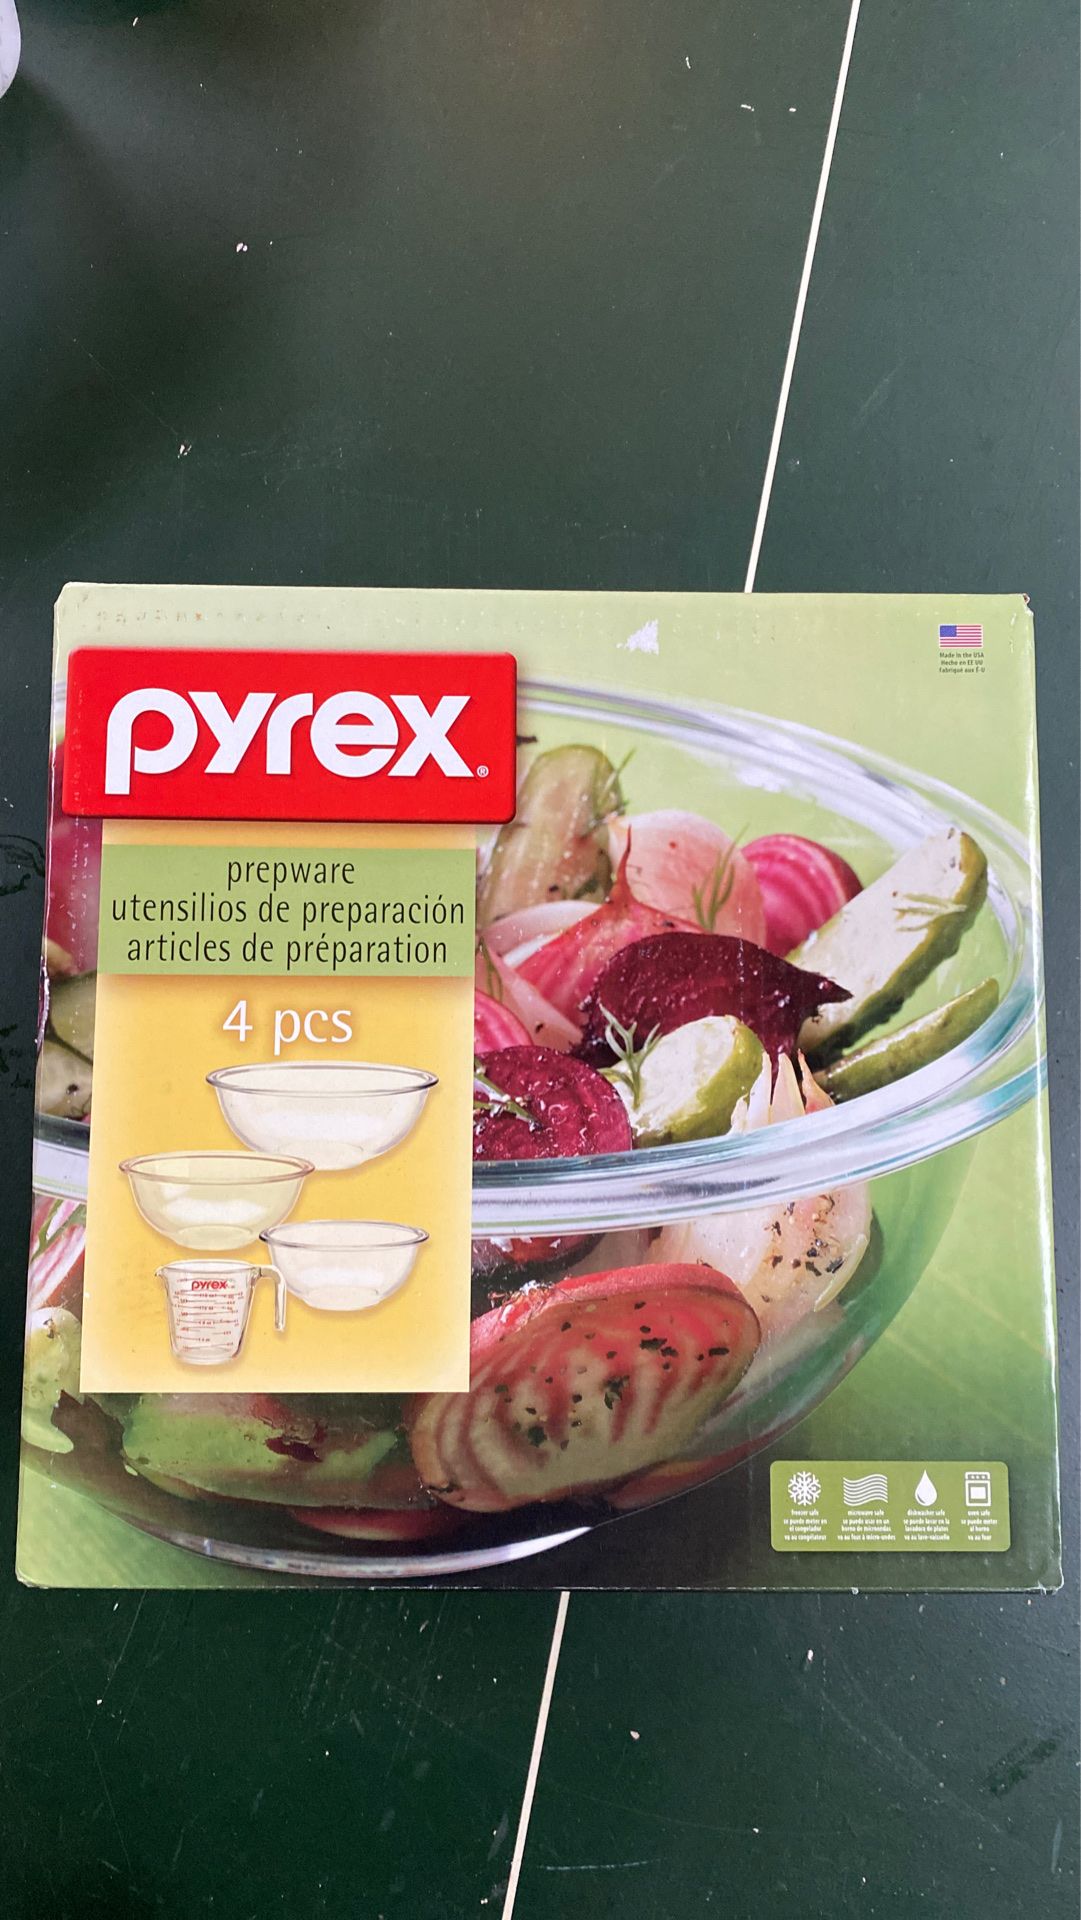 Pyrex prepware 4 piece set includes 3 nesting bowls and measuring cup